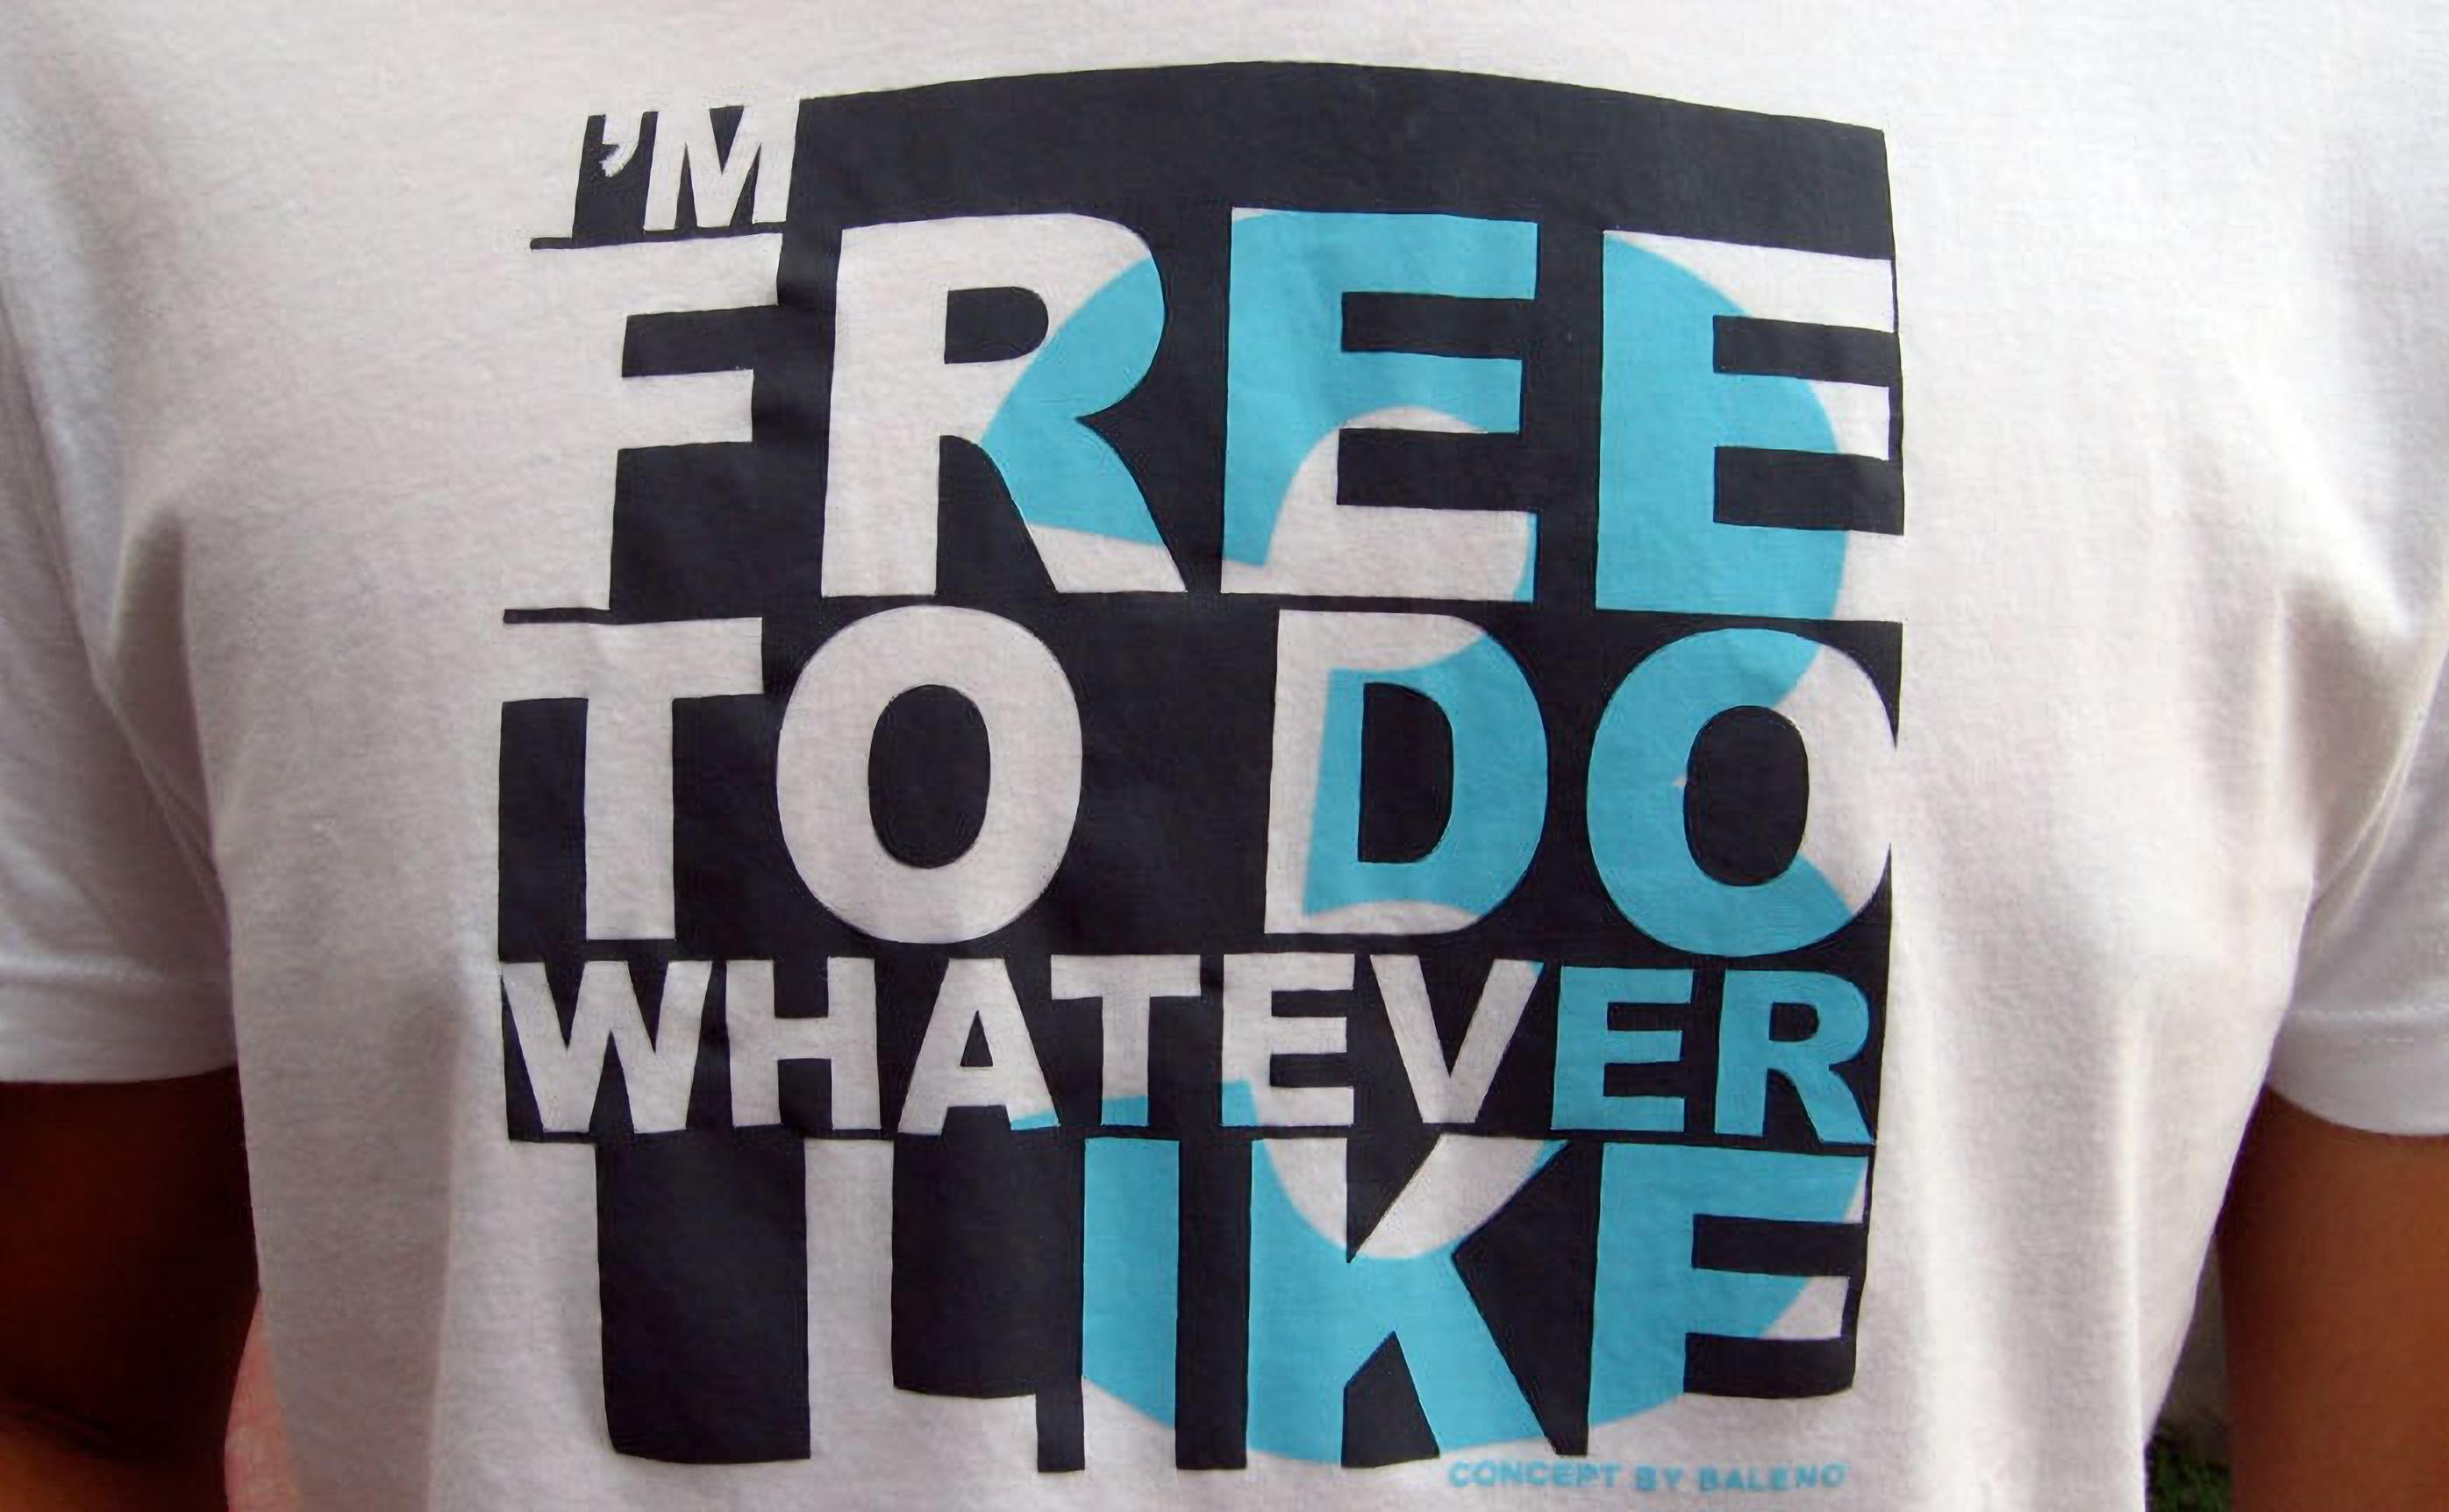 Whatever I Like, message t-shirt that became source for title of project, Beijing, 2007